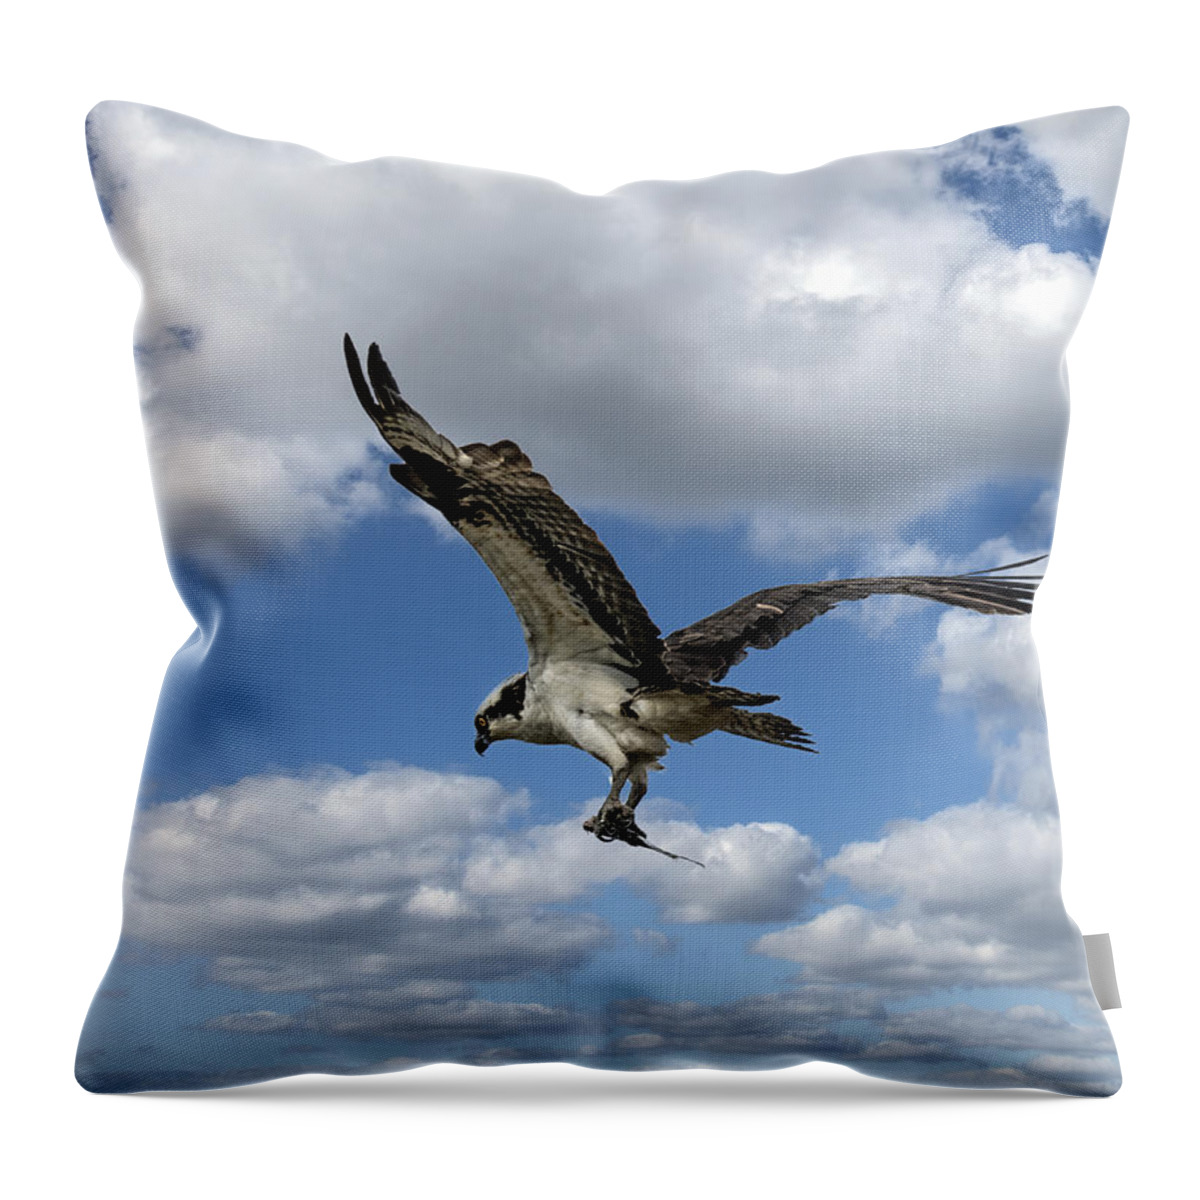 Bird Throw Pillow featuring the photograph Flight Among The Clouds by William Bitman